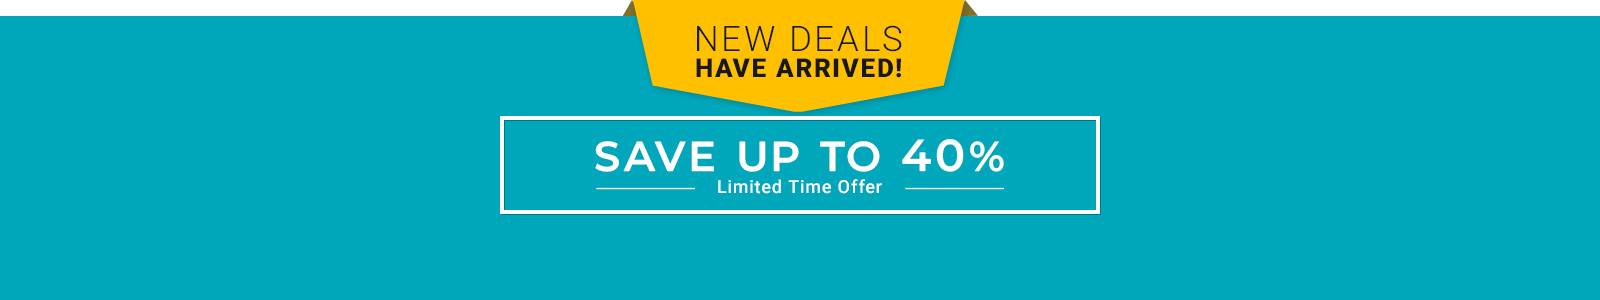 New Deals have Arrived!
Save up to 50% off Right Now
Limited Time Offer
Shop Now